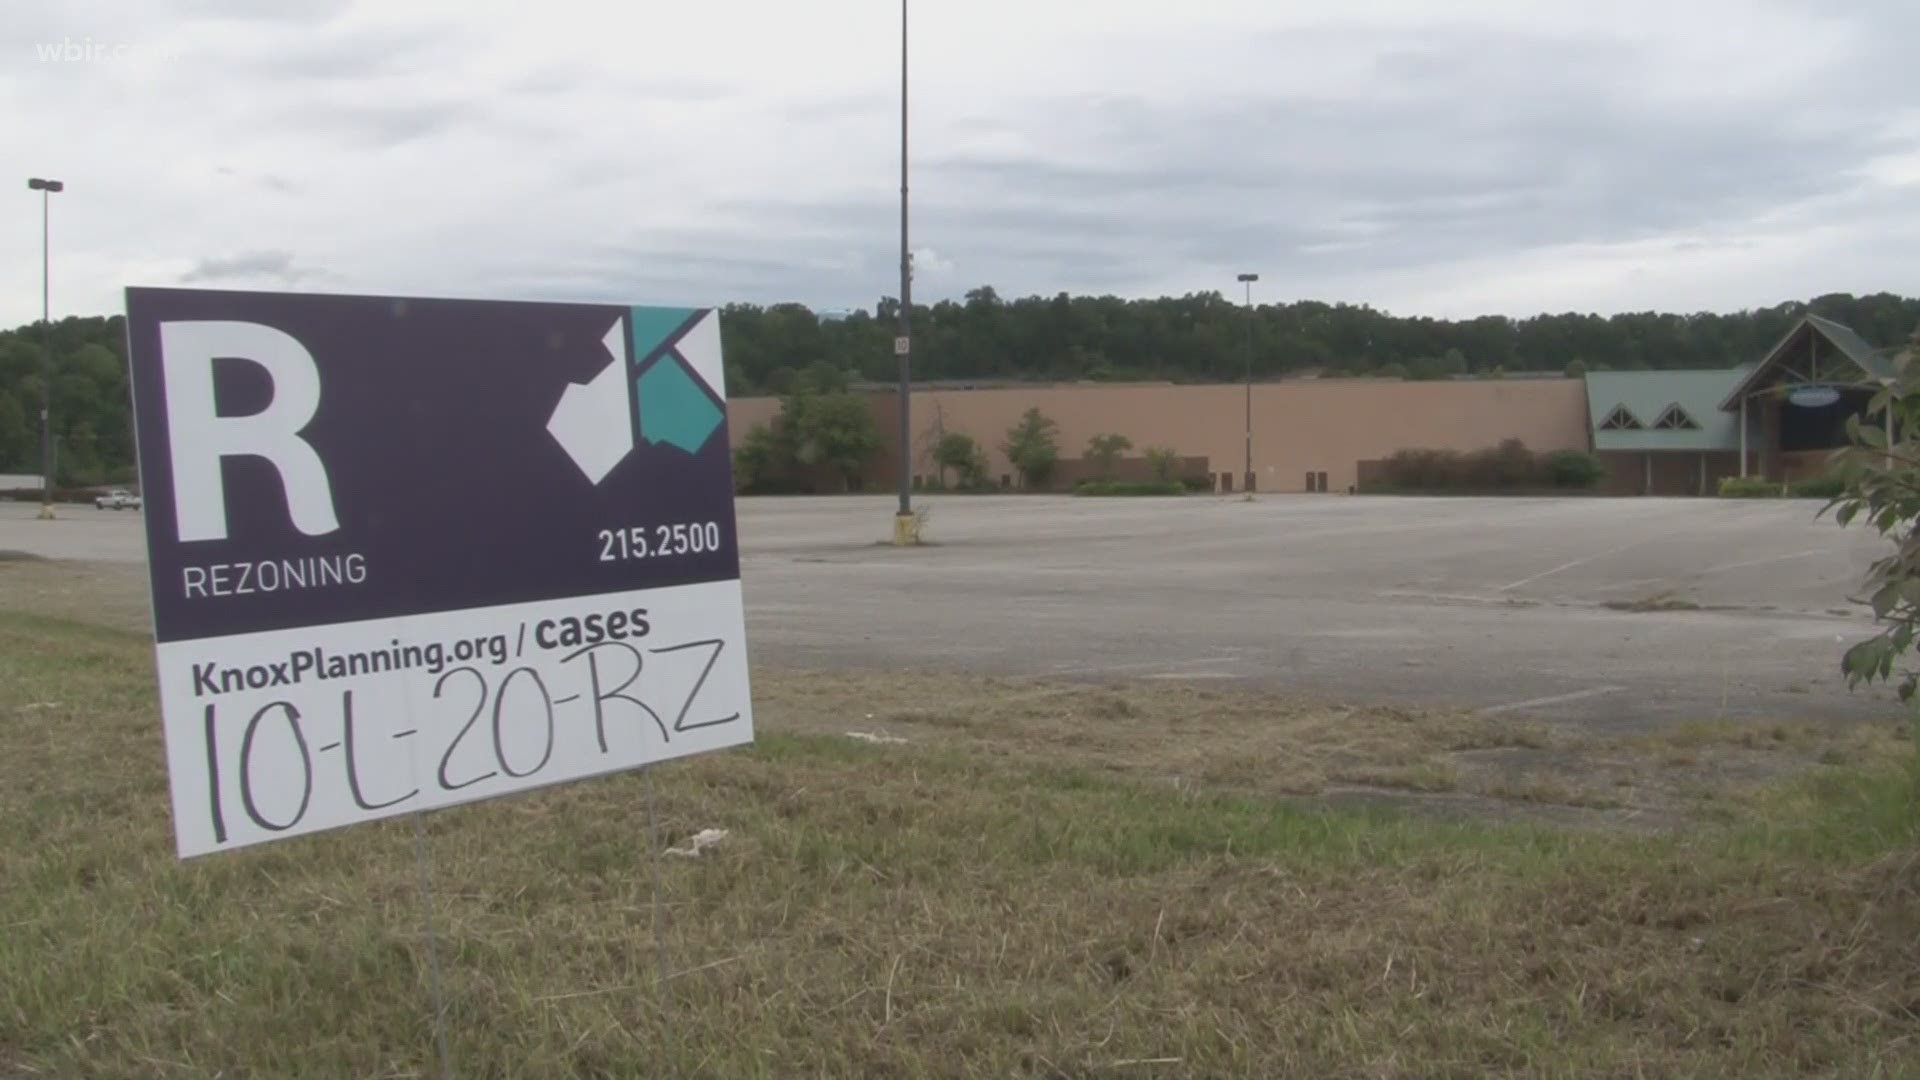 A real-estate broker that developed properties for Amazon and Wayfair is trying to re-zone the area for an e-commerce distribution center.